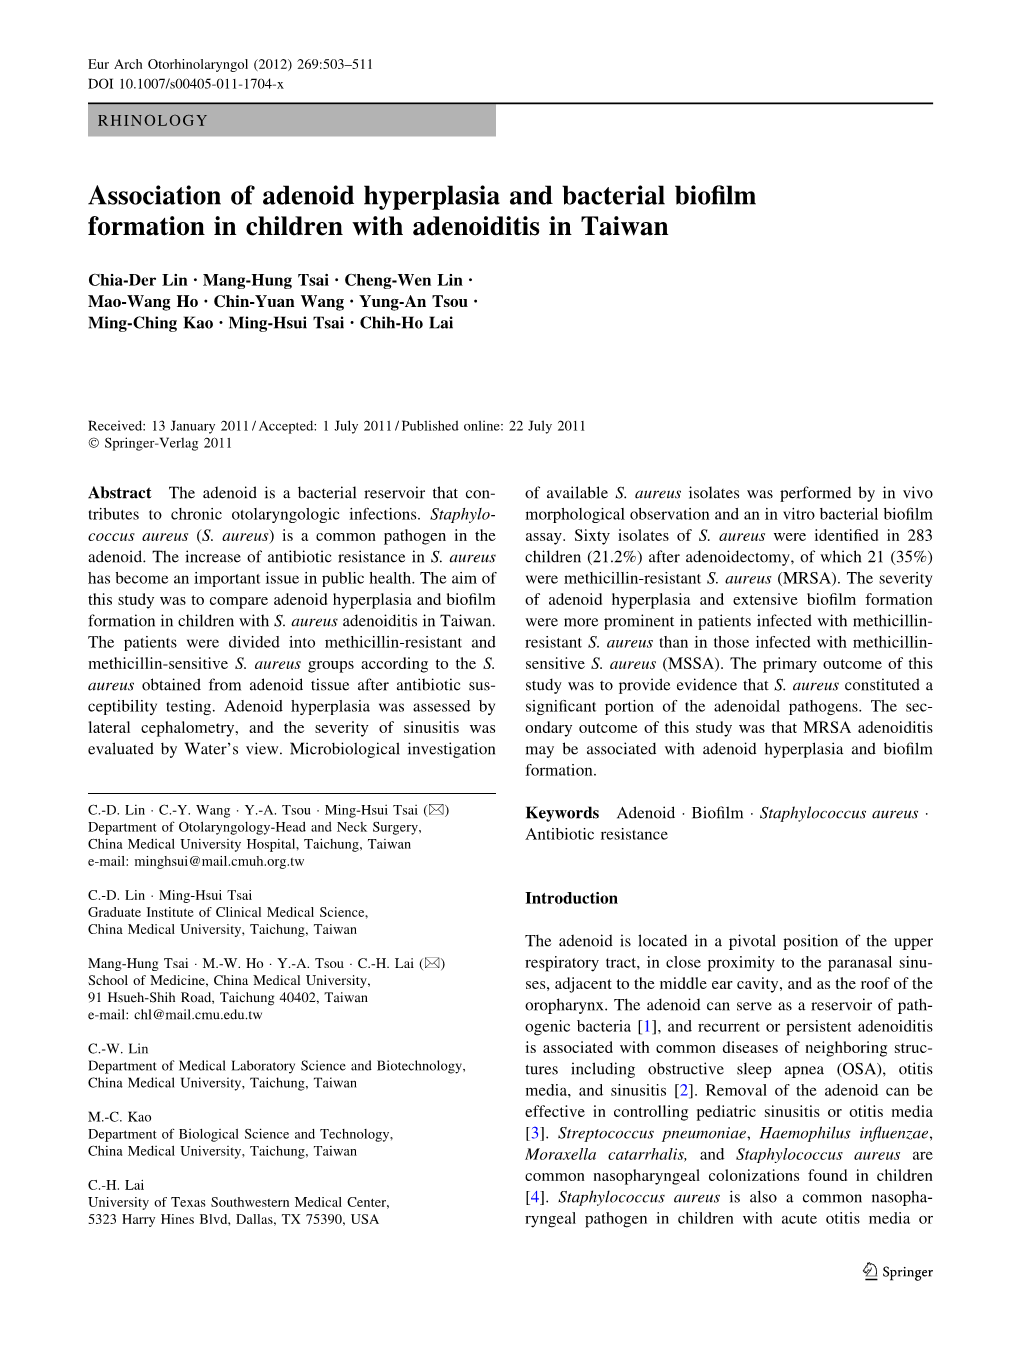 Association of Adenoid Hyperplasia and Bacterial Biofilm Formation In